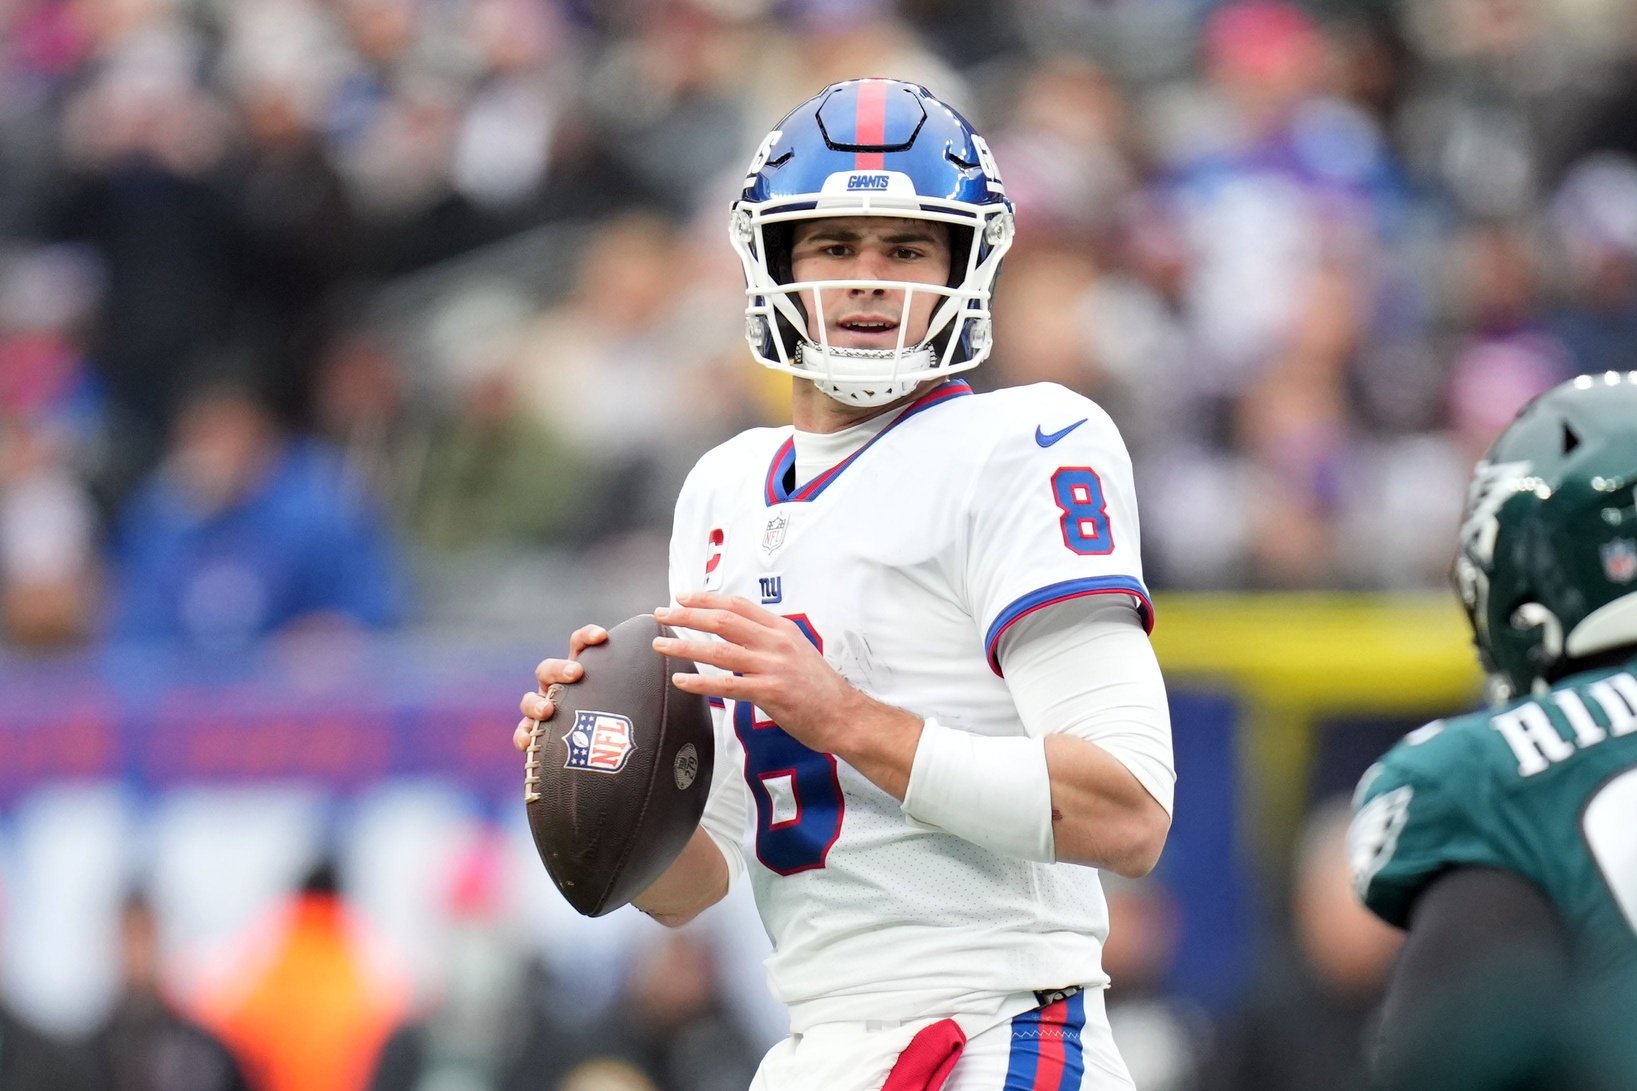 Revisiting why the Giants selected Daniel Jones sixth overall in